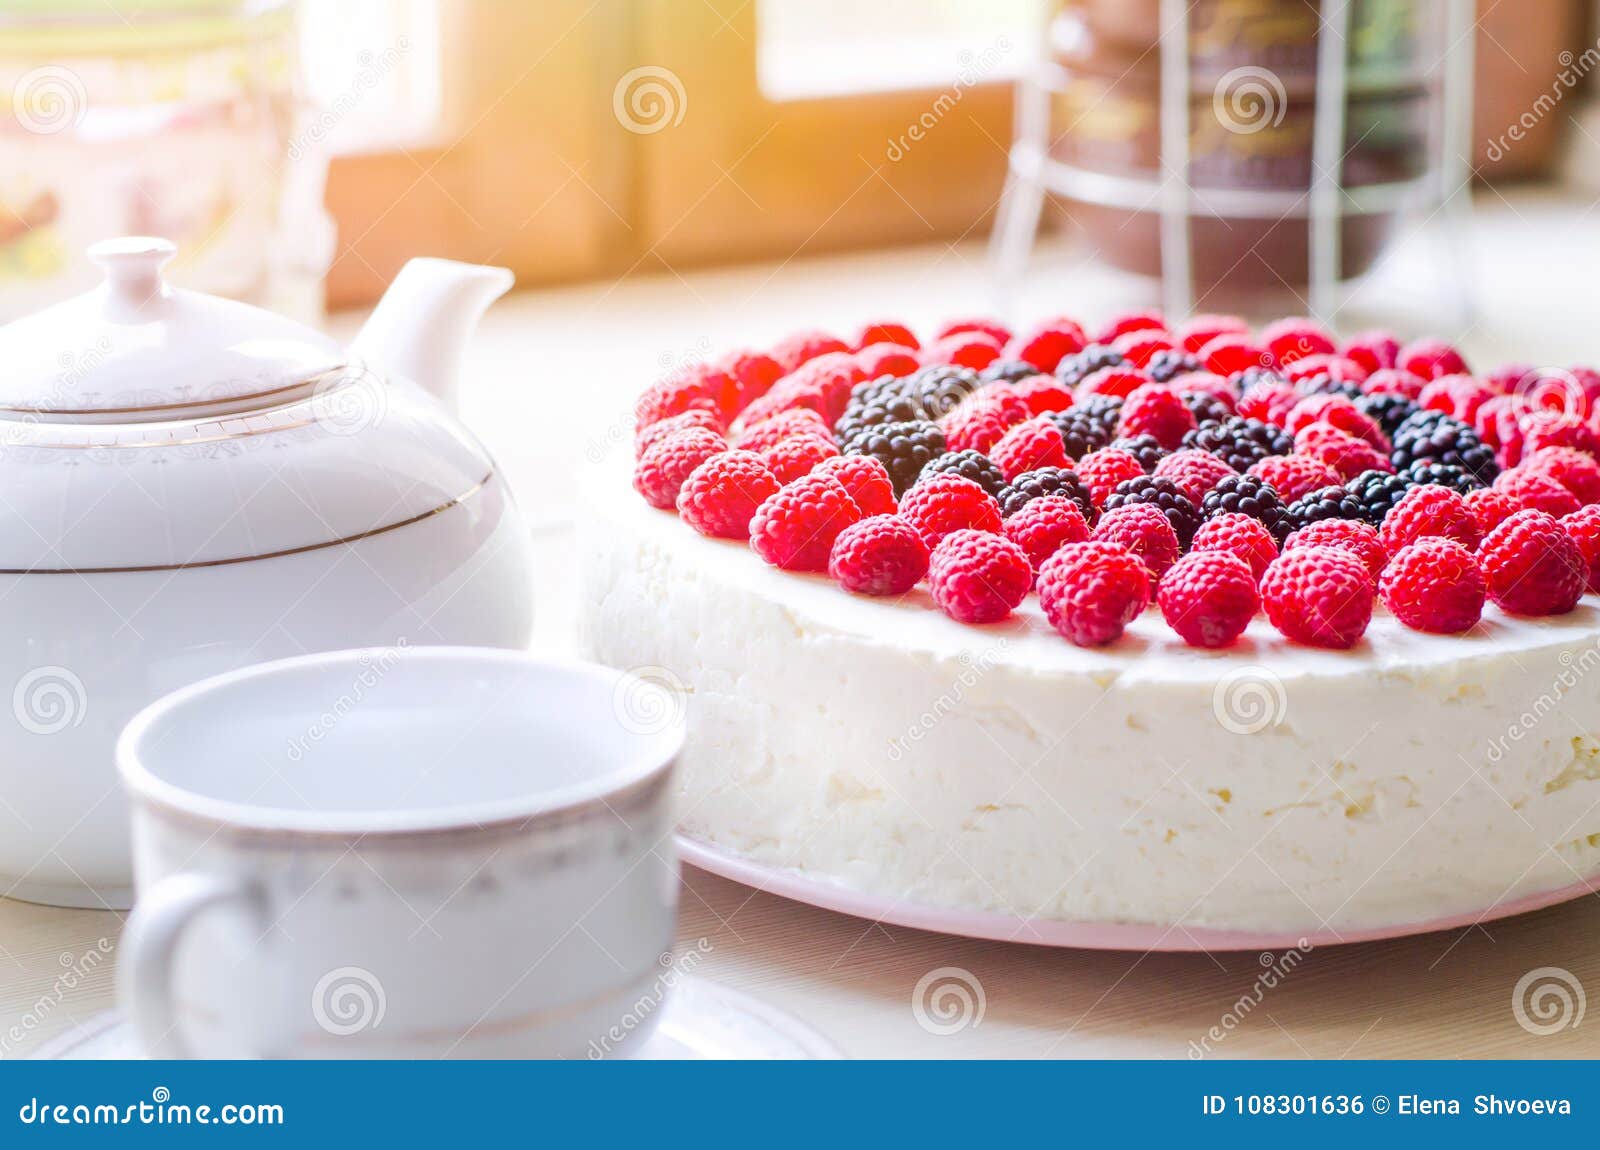 Home Mousse Cake With Cottage Cheese And Jello With Raspberries